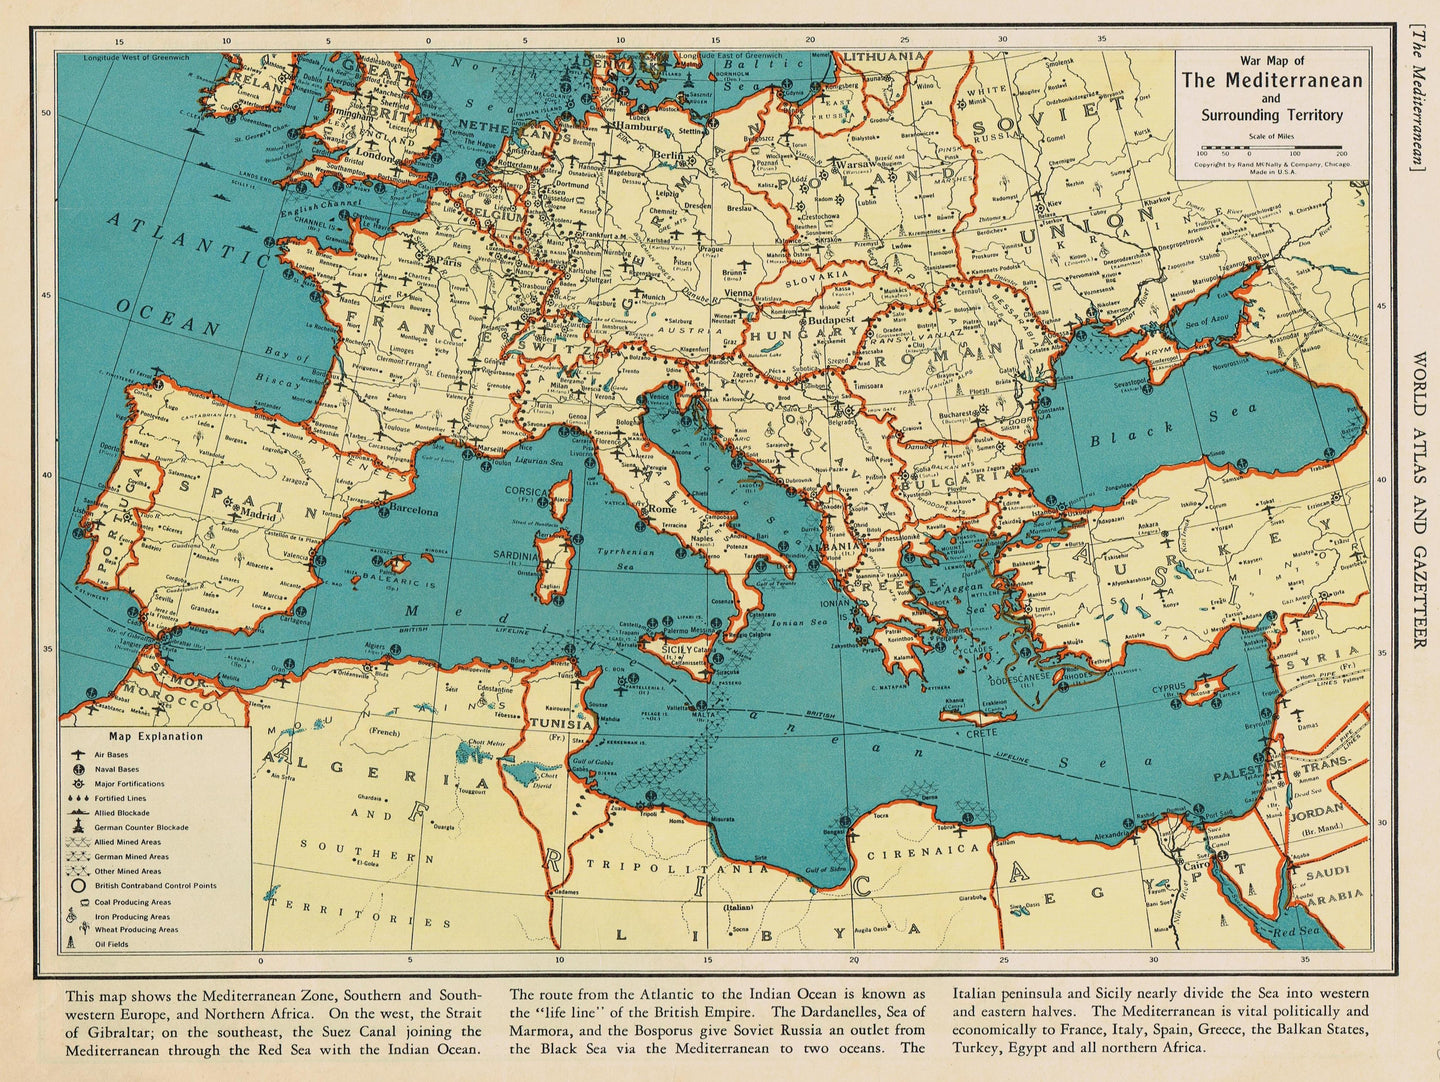 Genuine-Antique-Map-War-Map-of-The-Mediterranean-1940-Rand-McNally-Maps-Of-Antiquity